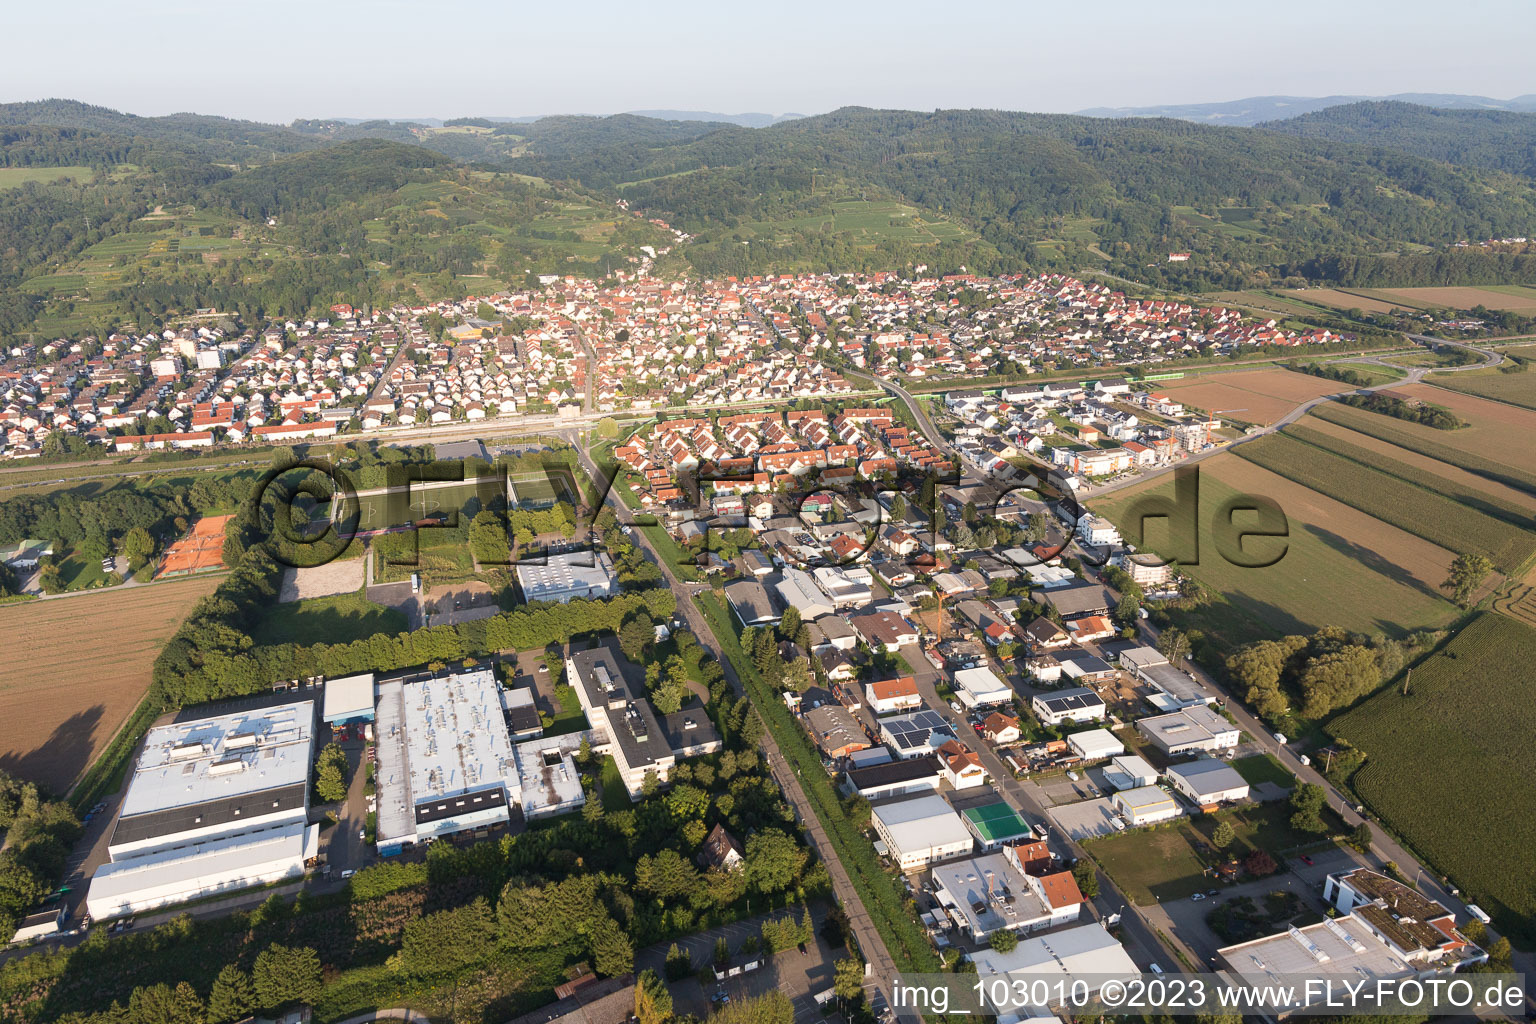 Laudenbach in the state Baden-Wuerttemberg, Germany from the drone perspective